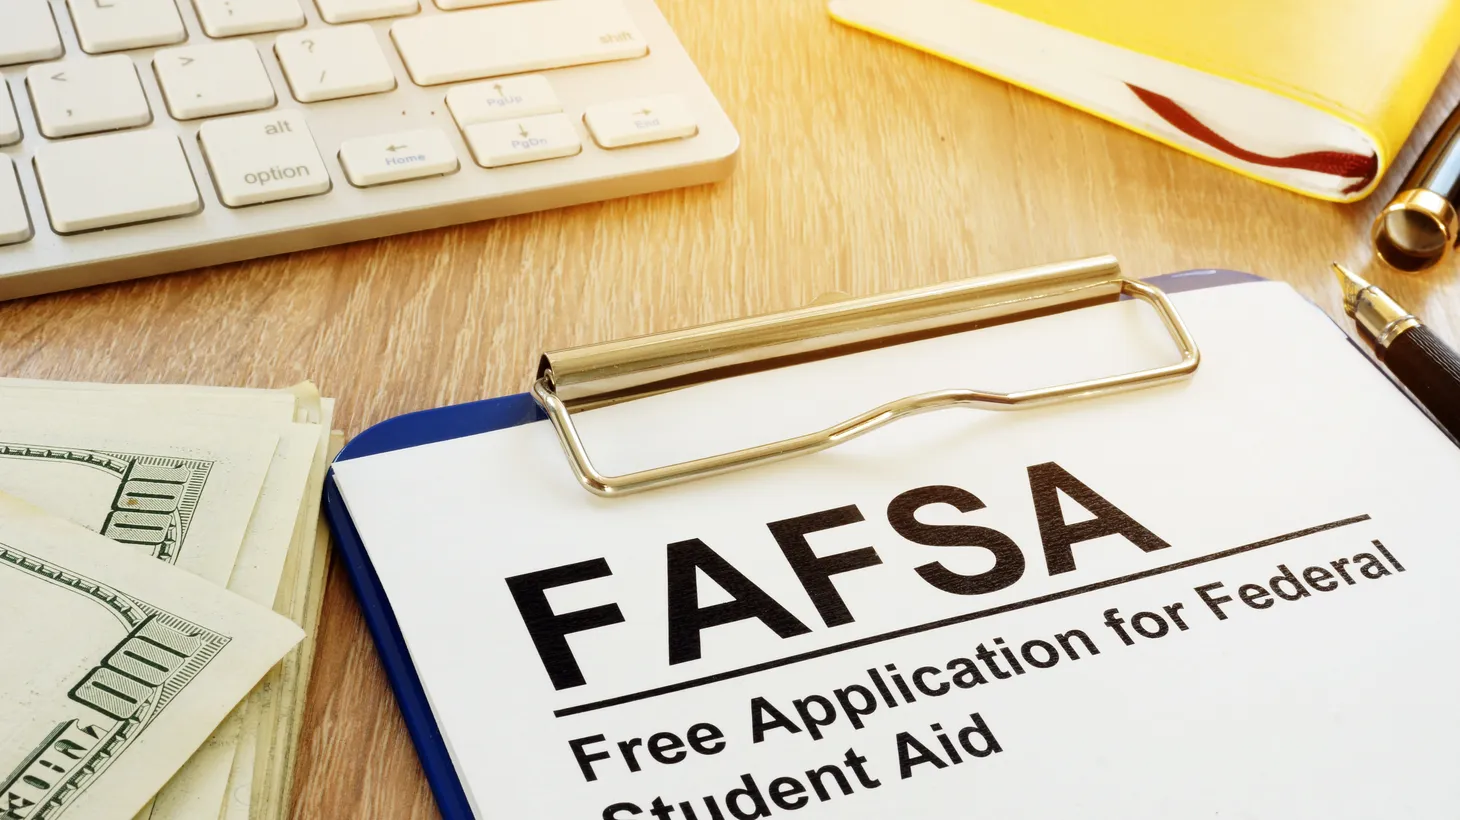 Due to technical glitches, students have had trouble filling out the Free Application for Federal Student Aid (FAFSA) online.